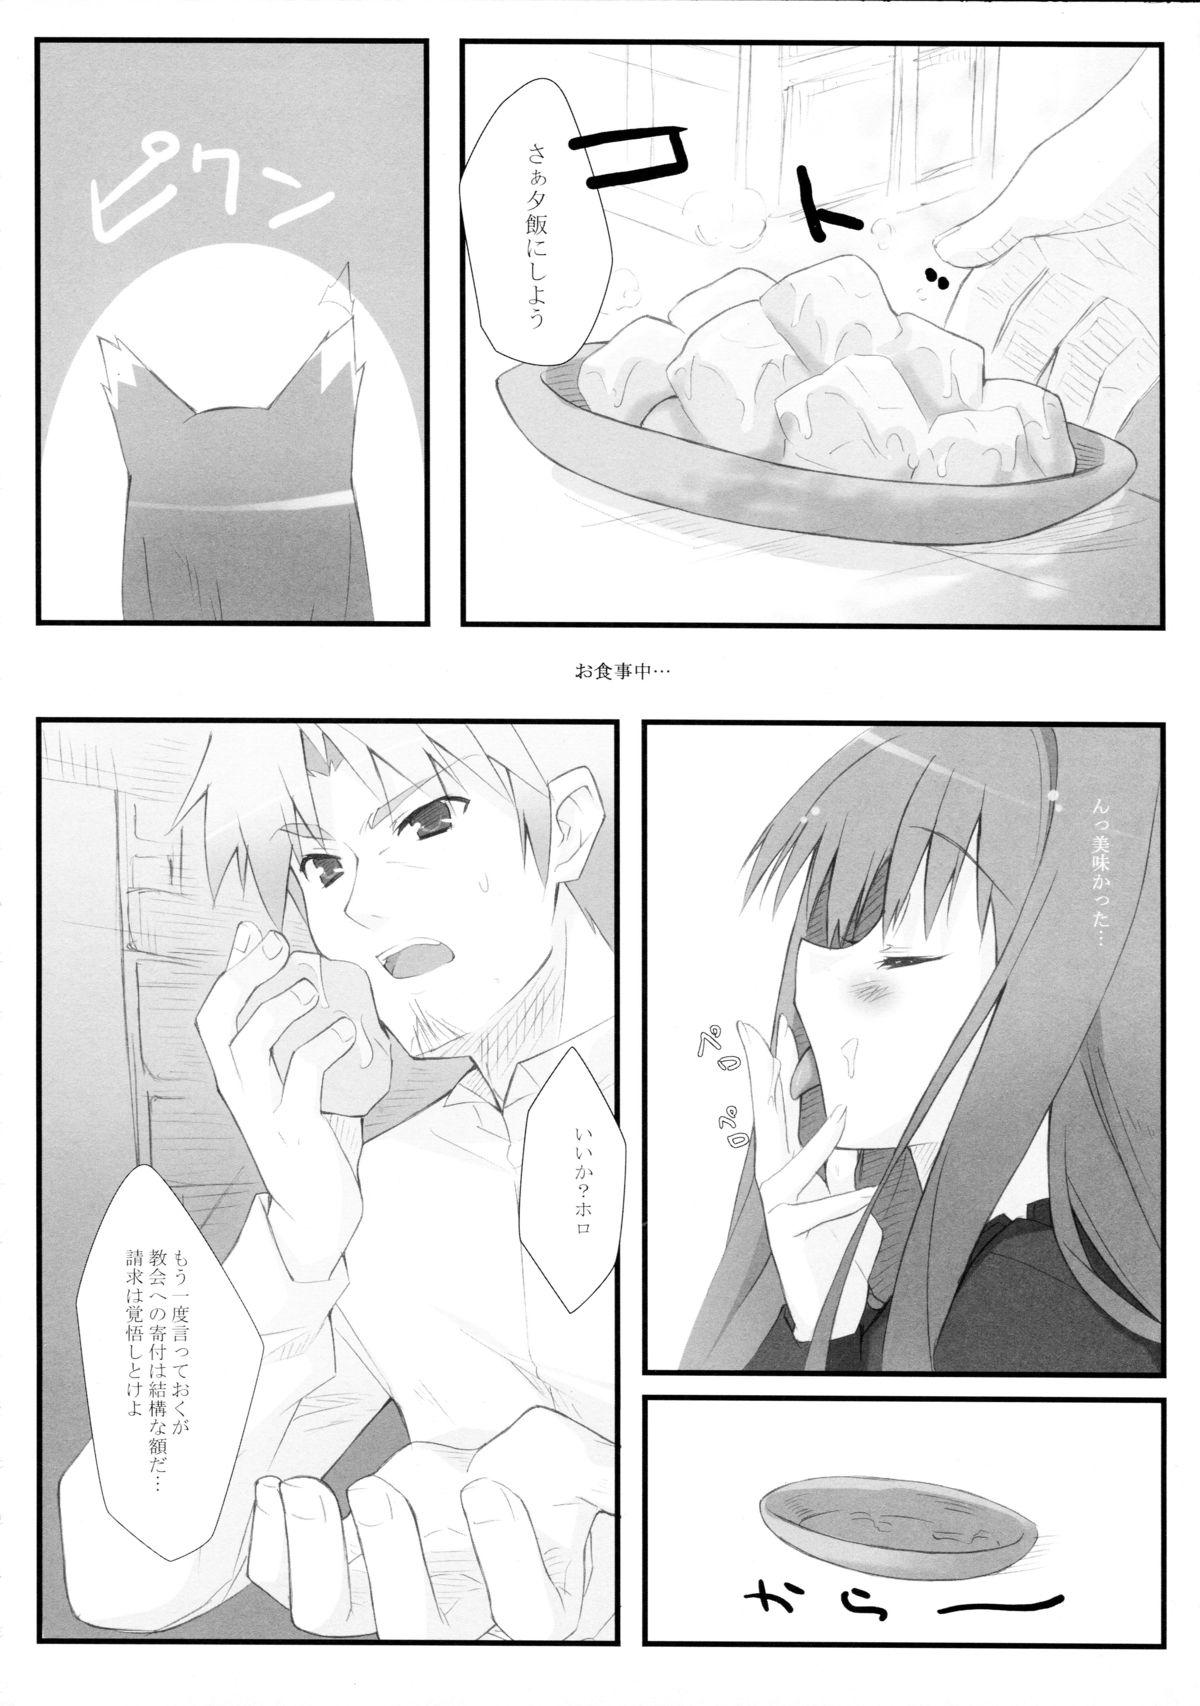 Eurosex Komugi to Hito to Ookami to - Spice and wolf Eat - Page 4